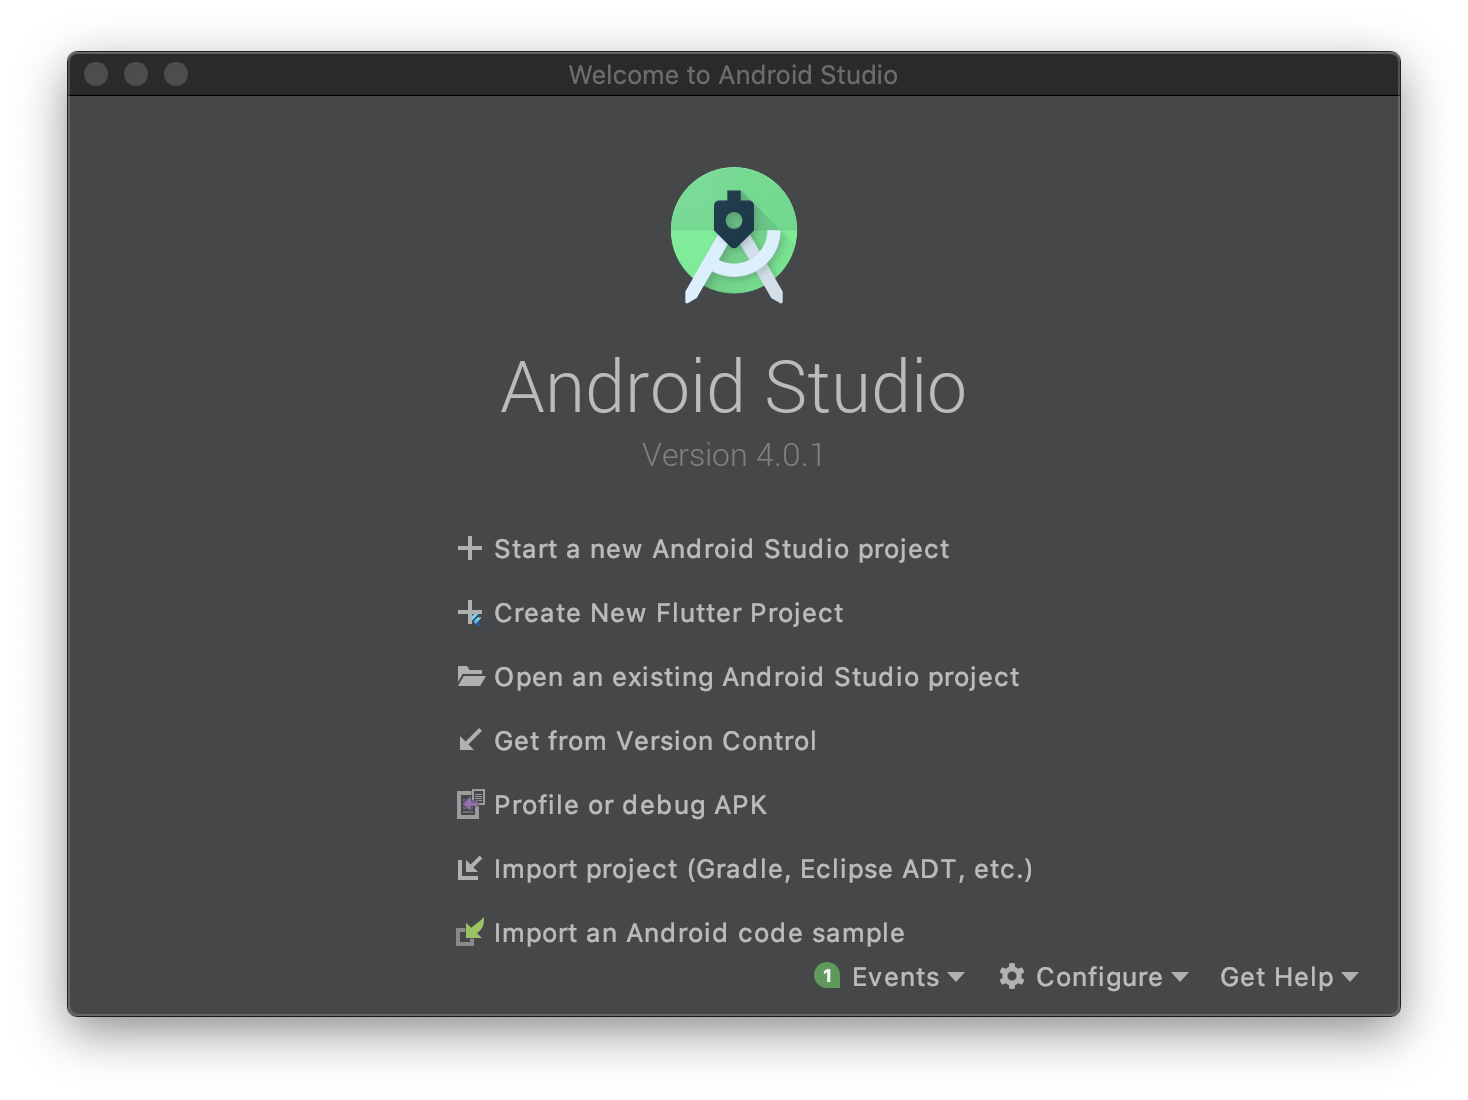 Android studio welcome page